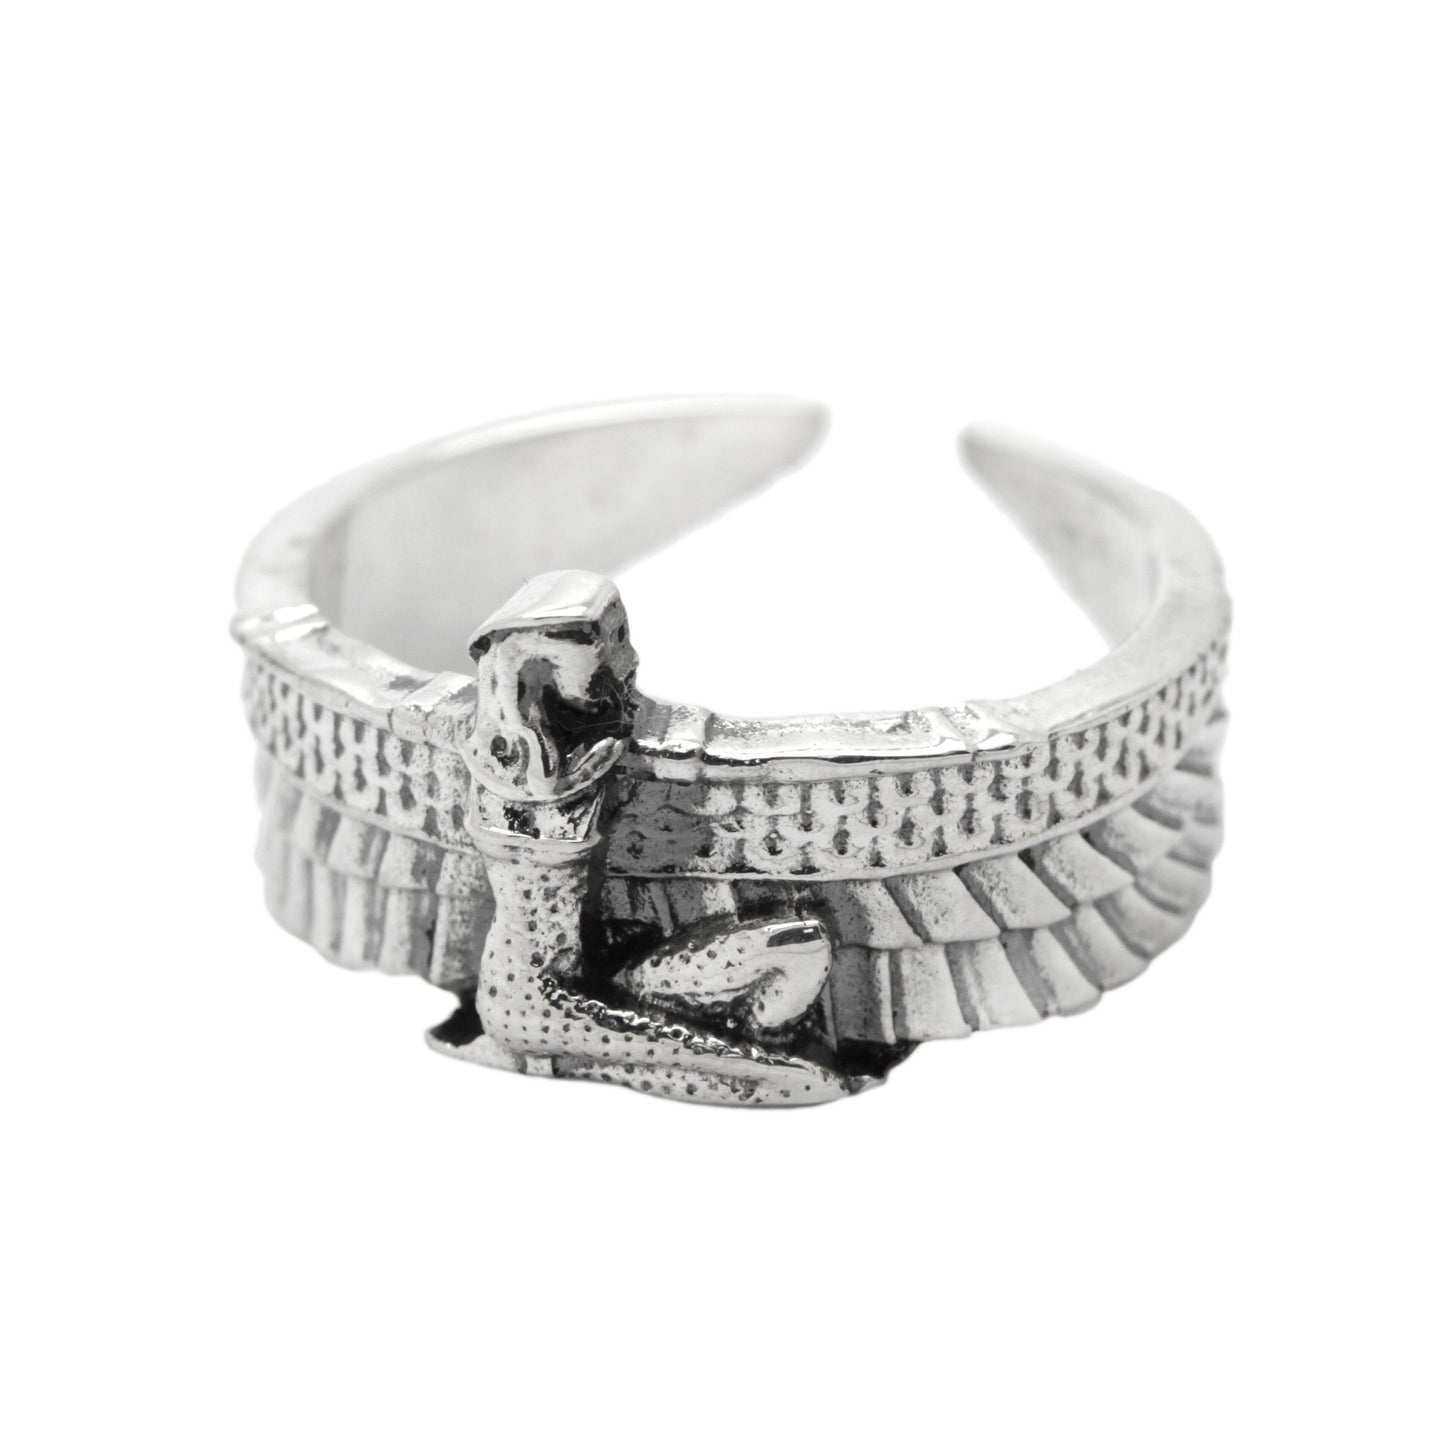 Isis Ancient Egyptian Goddess Women's Ring Silver 925